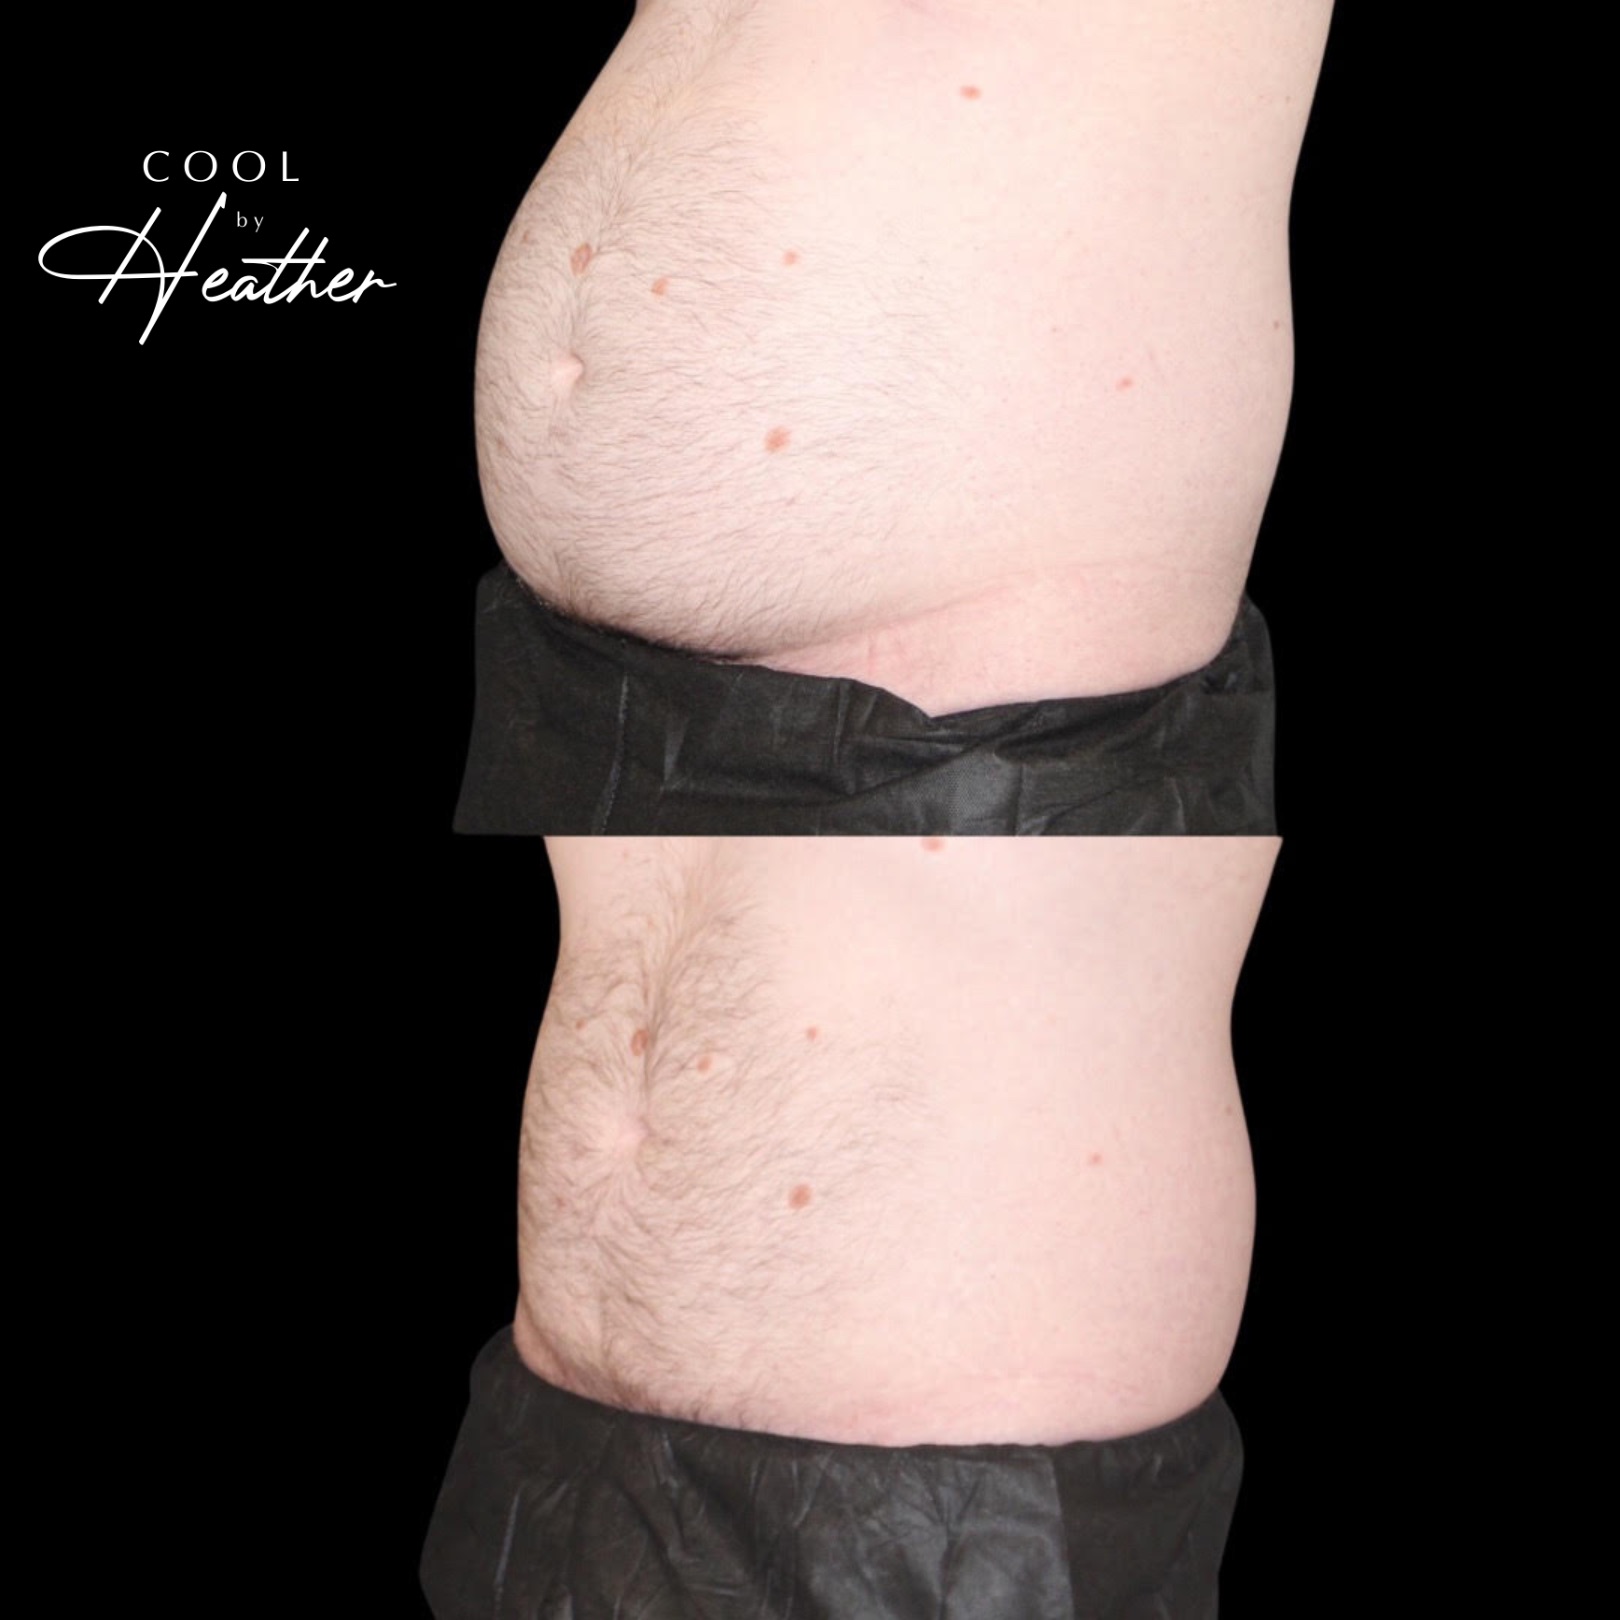 Before and after Coolsculpting treatment showing a big difference in the fat volume of a man's belly, a service offered at Haus of Aesthetics in Salt Lake City, Utah.